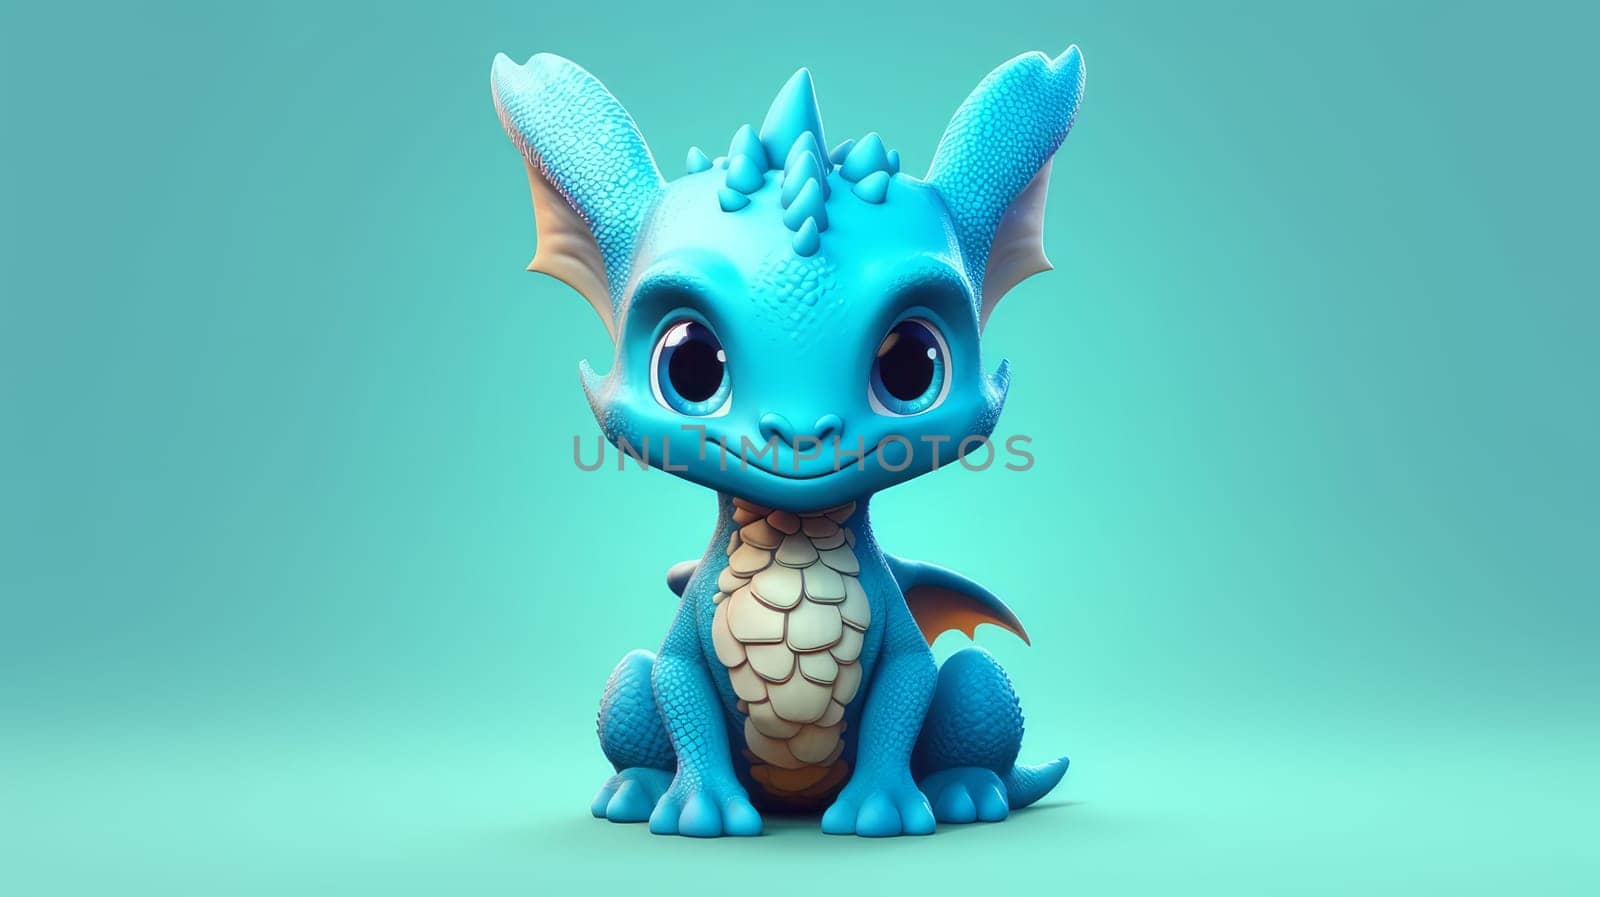 A cute little dragon is a symbol of the new year according to the eastern calendar on a plain background. AI generated